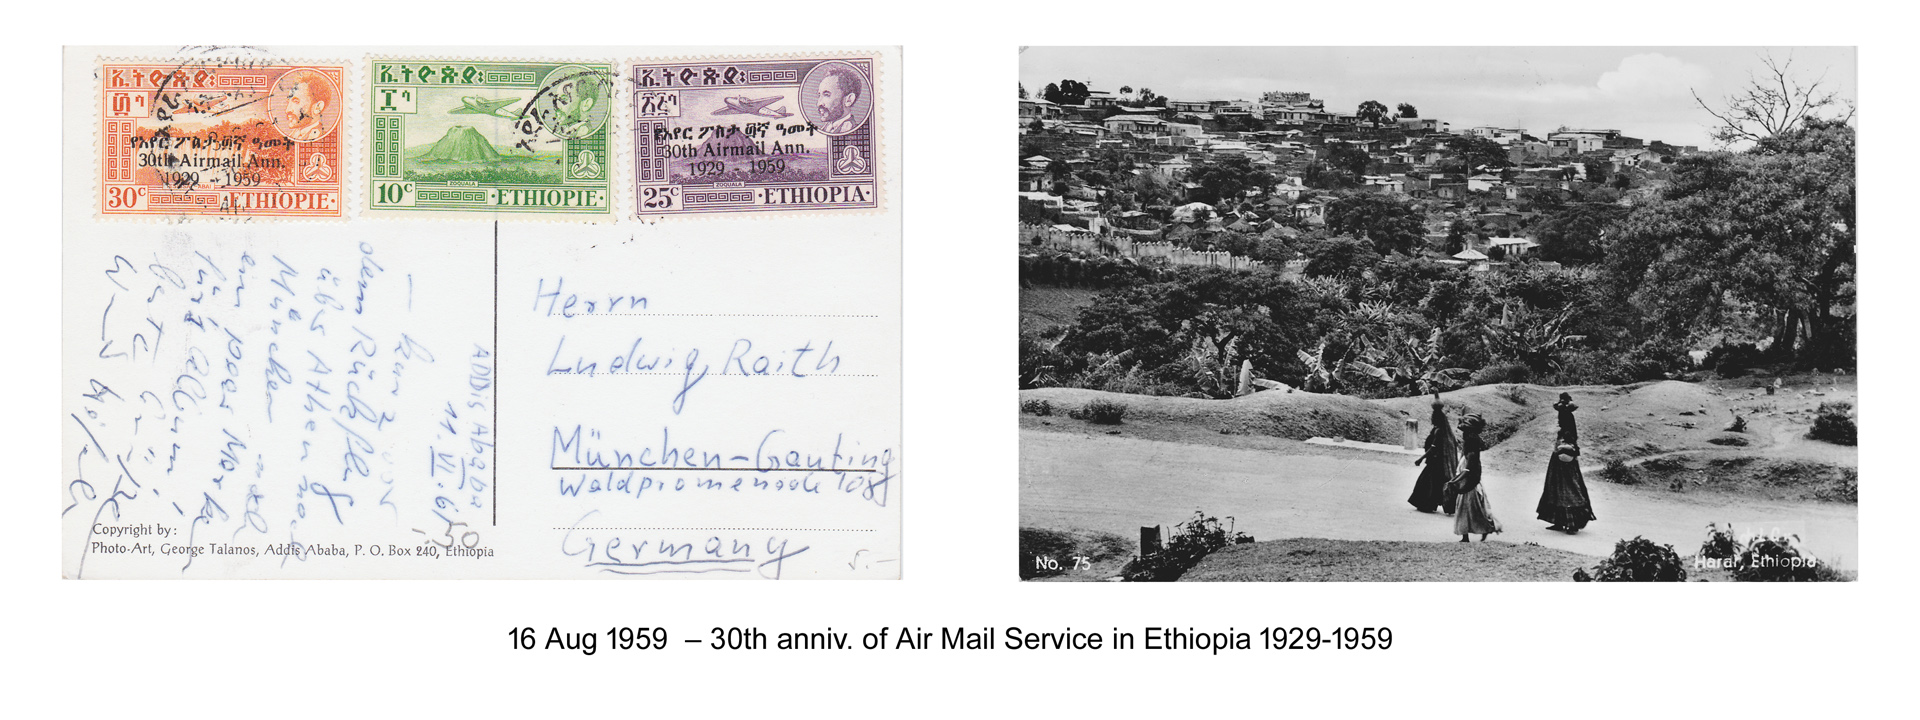 19590816 – 30th anniv. of Air Mail Service in Ethiopia 1929-1959 (overprint on 1947 Air Mail issue)